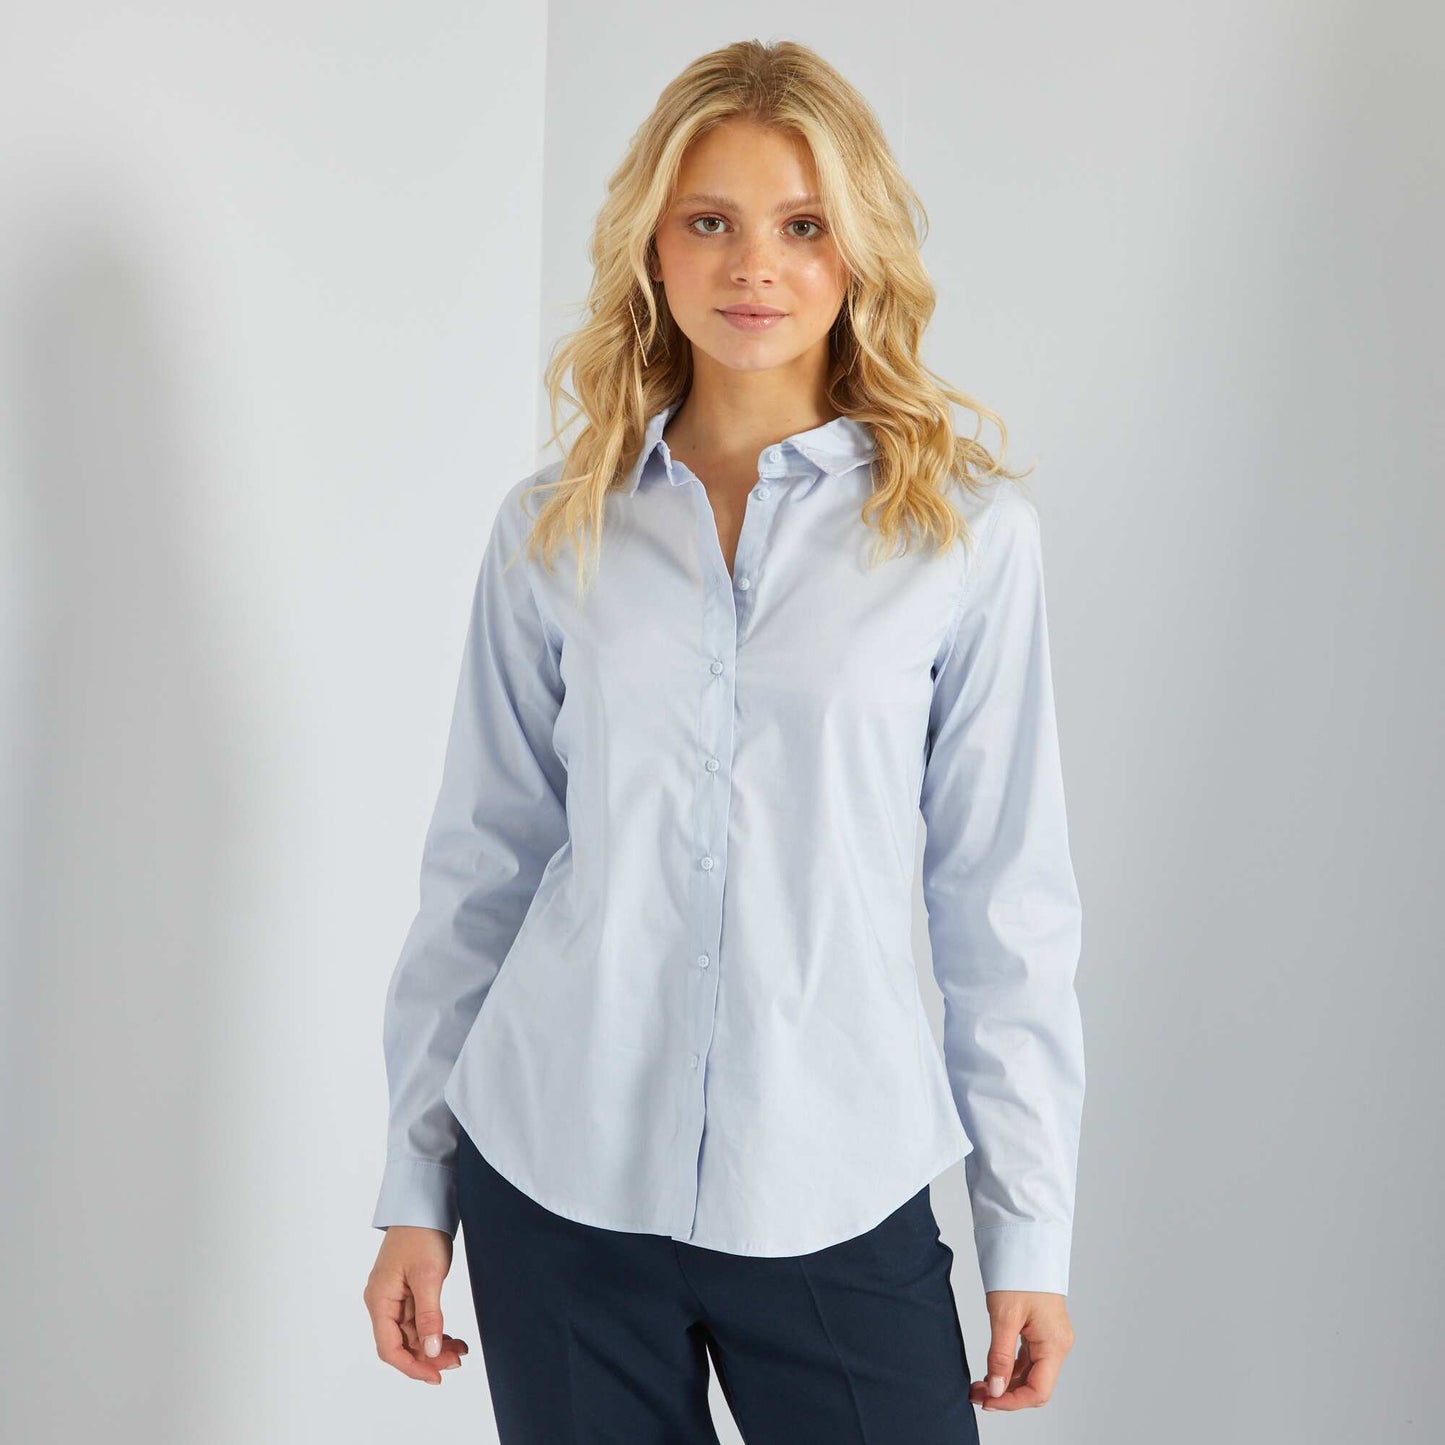 Fitted shirt with cutaway collar blue grey